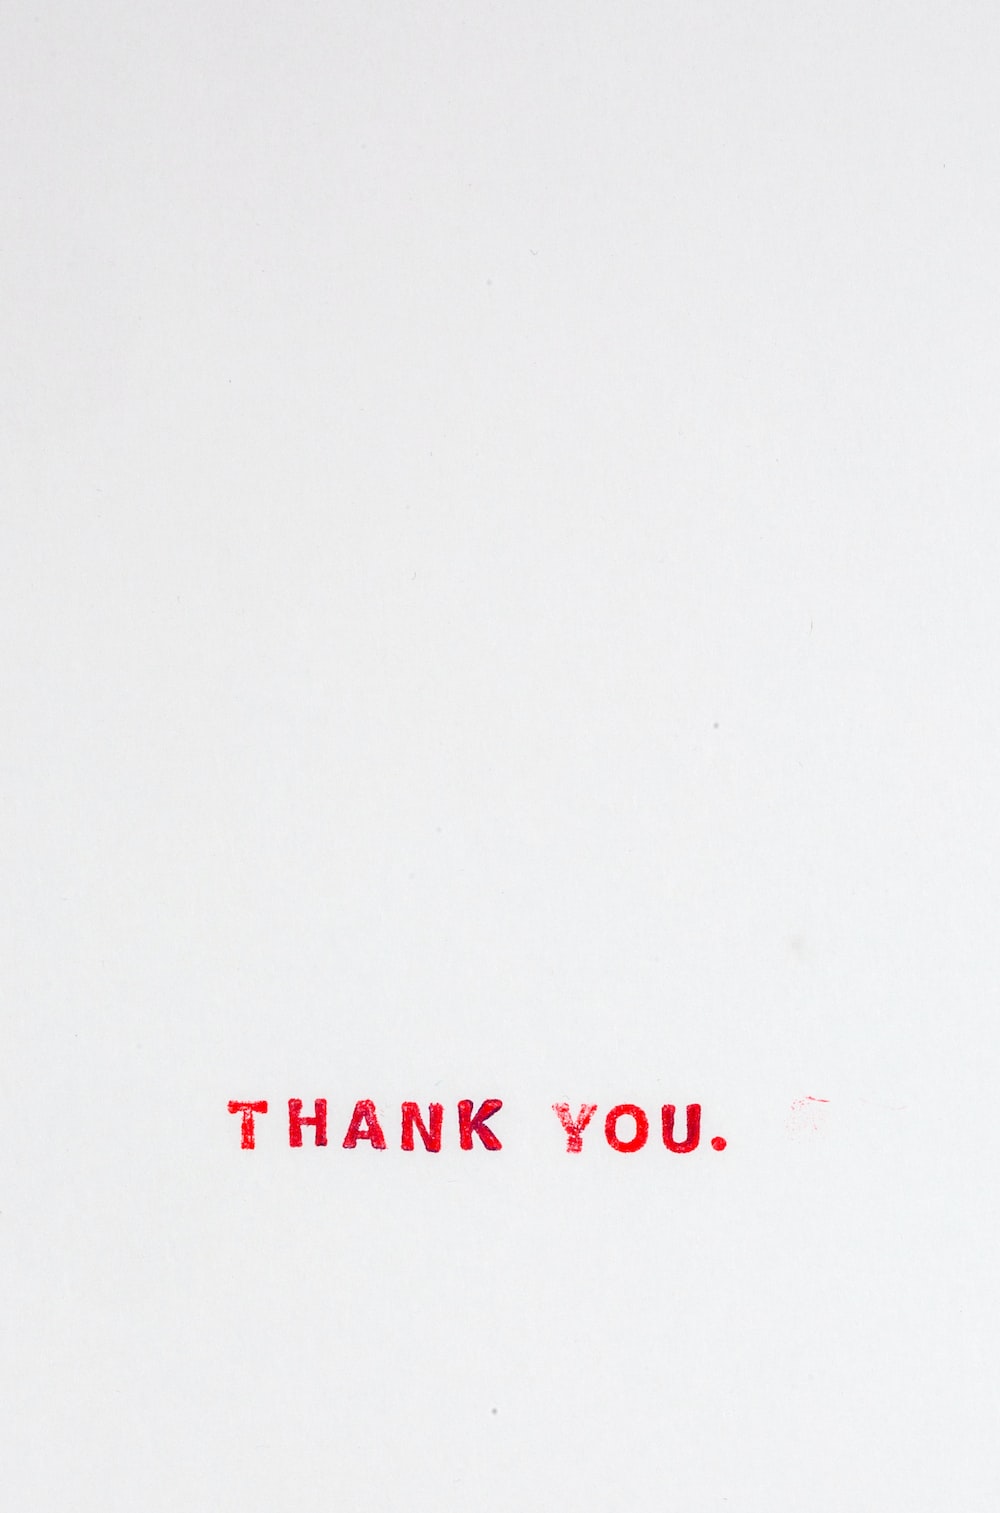 Thank You in red on white